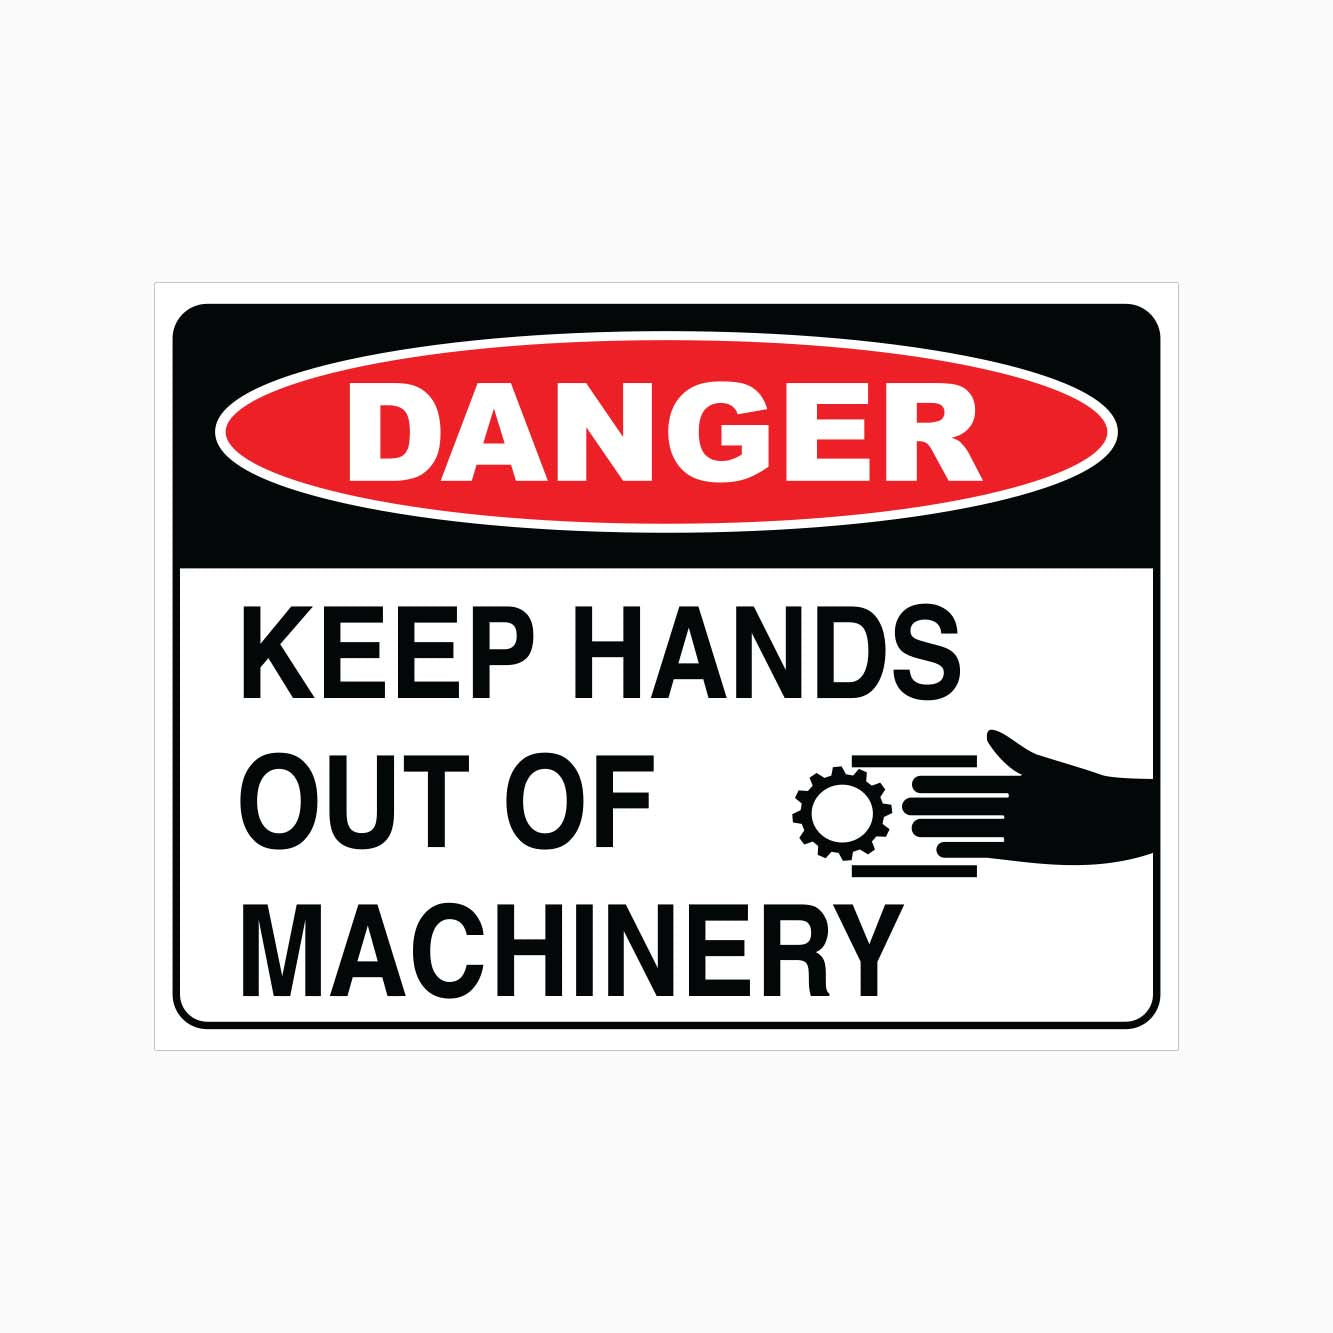 DANGER KEEP HANDS OUT OF MACHINERY SIGN - GET SIGNS